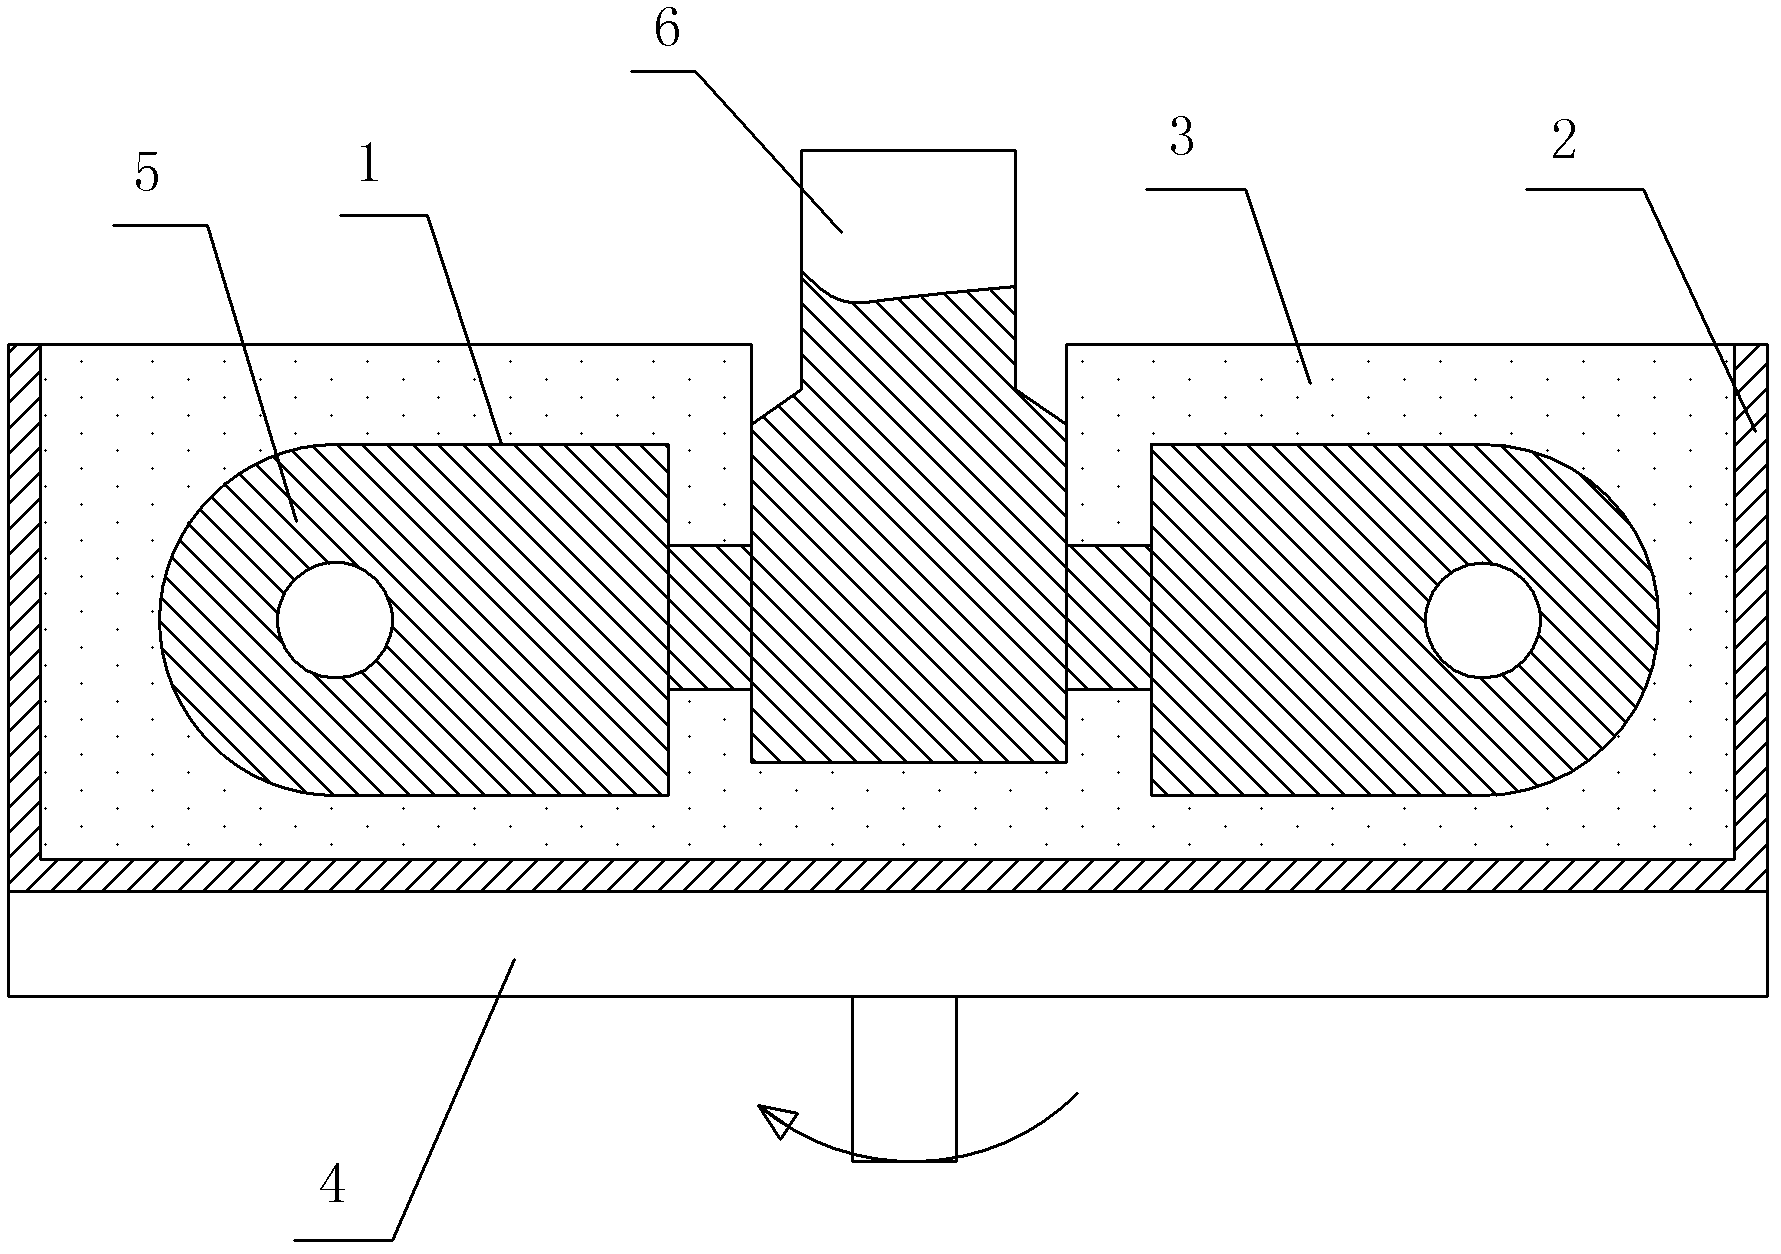 A centrifugal pouring method for water glass investment casting